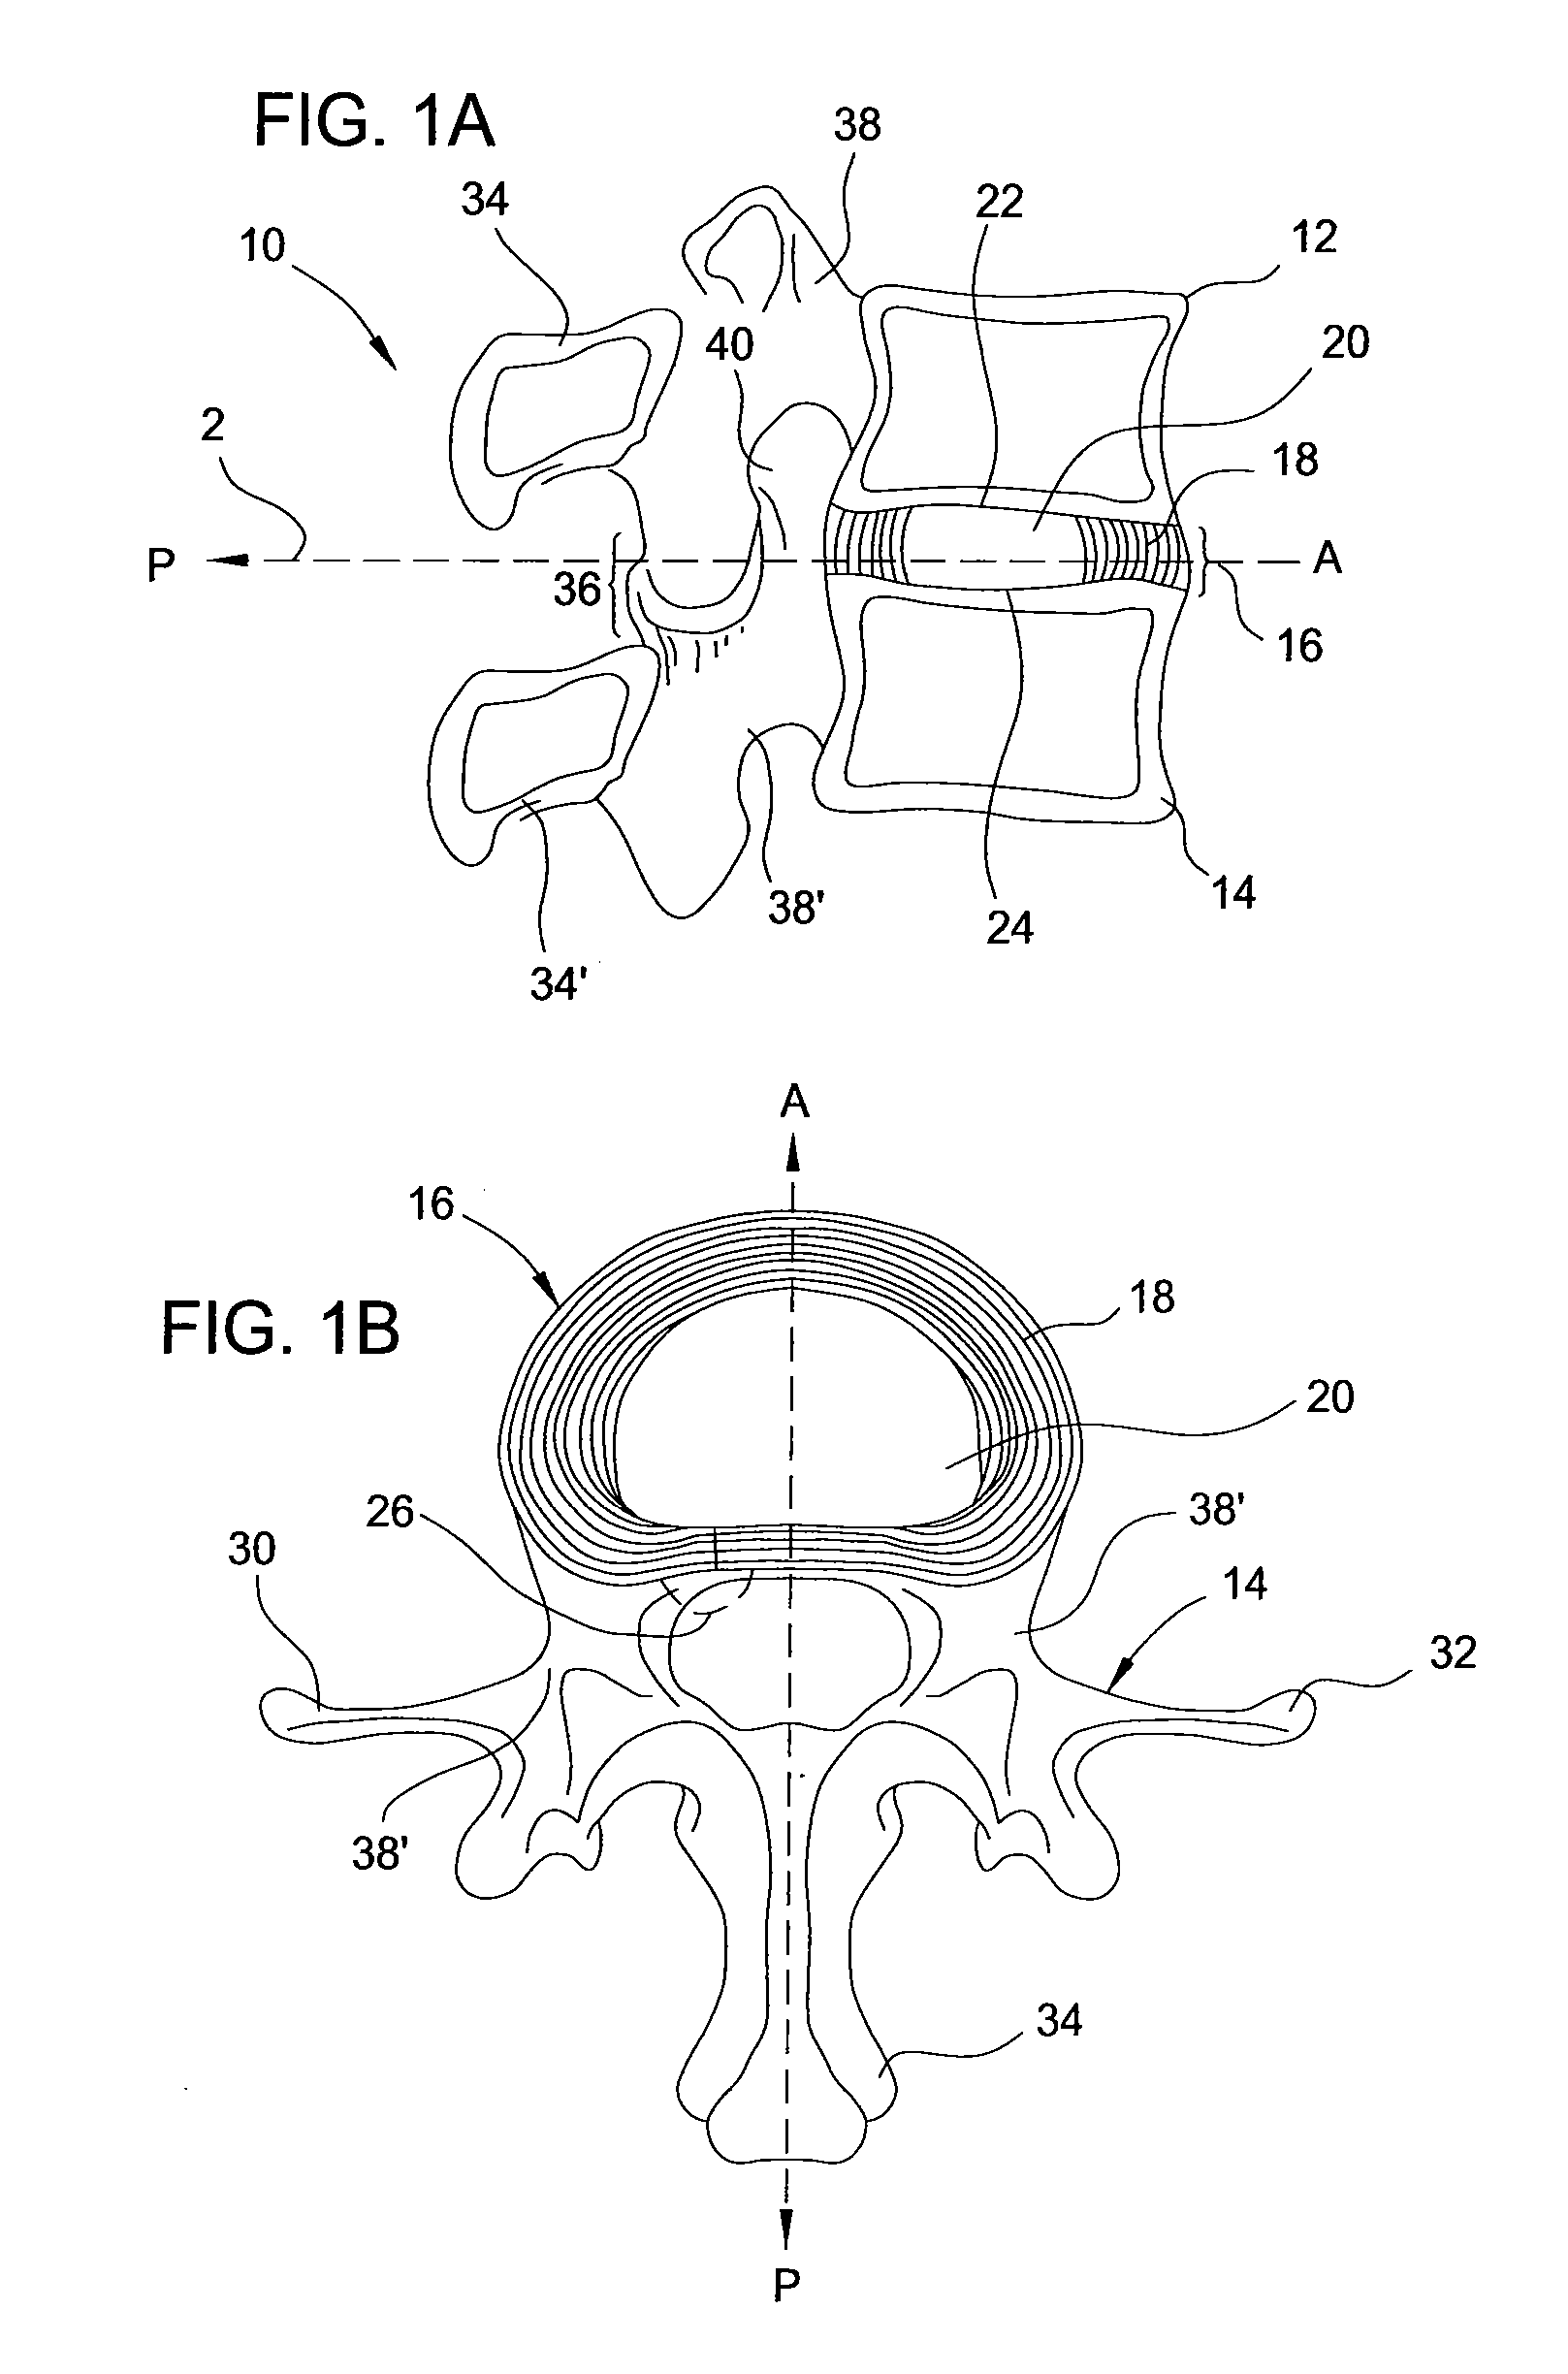 Devices, systems and methods for treating intervertebral discs